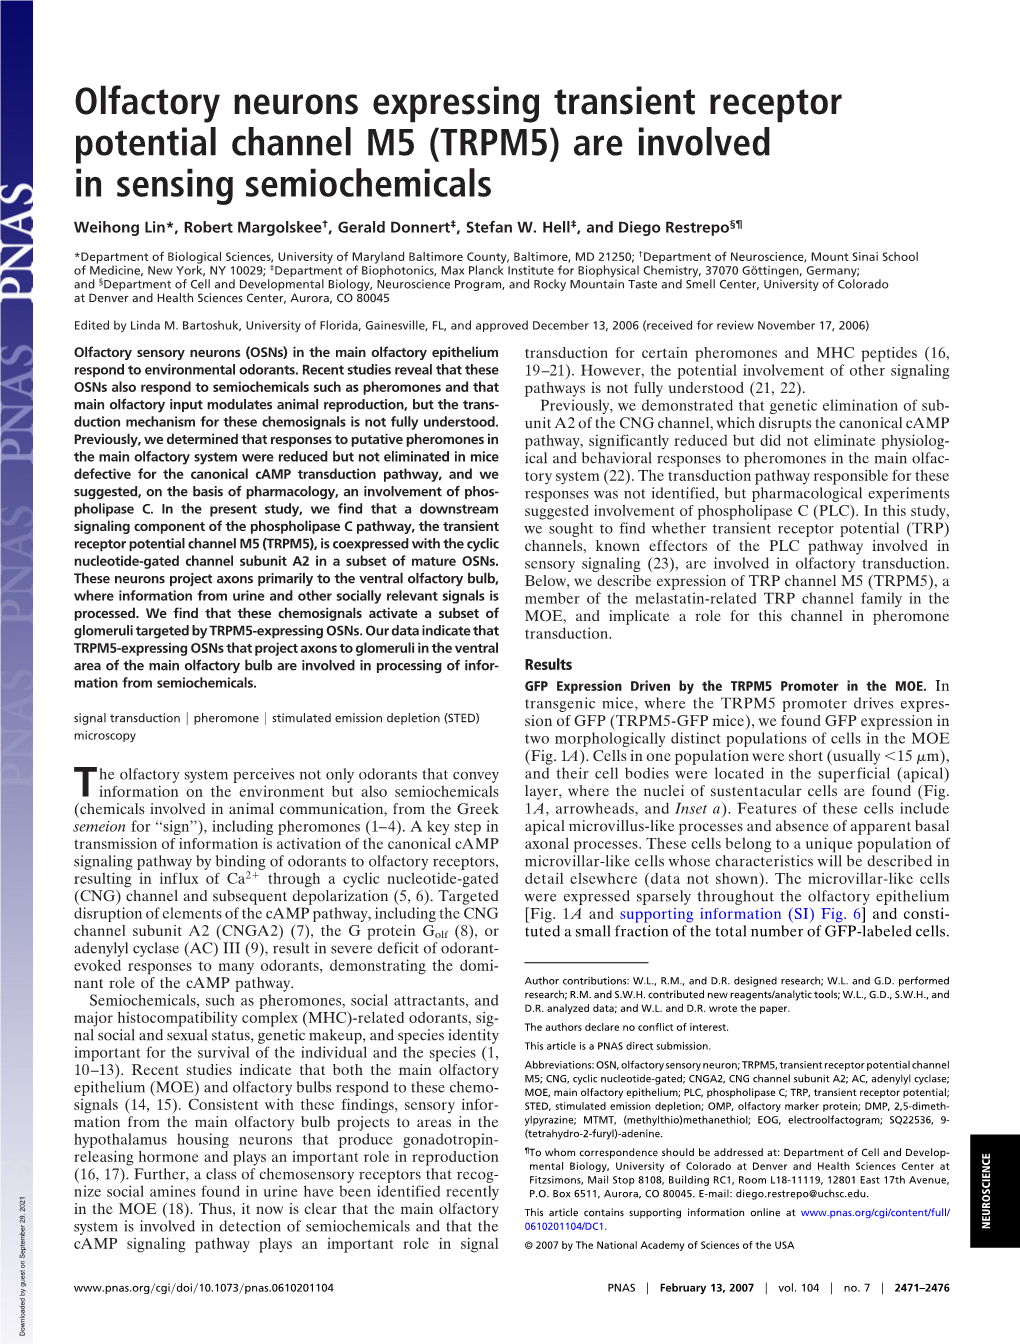 TRPM5) Are Involved in Sensing Semiochemicals